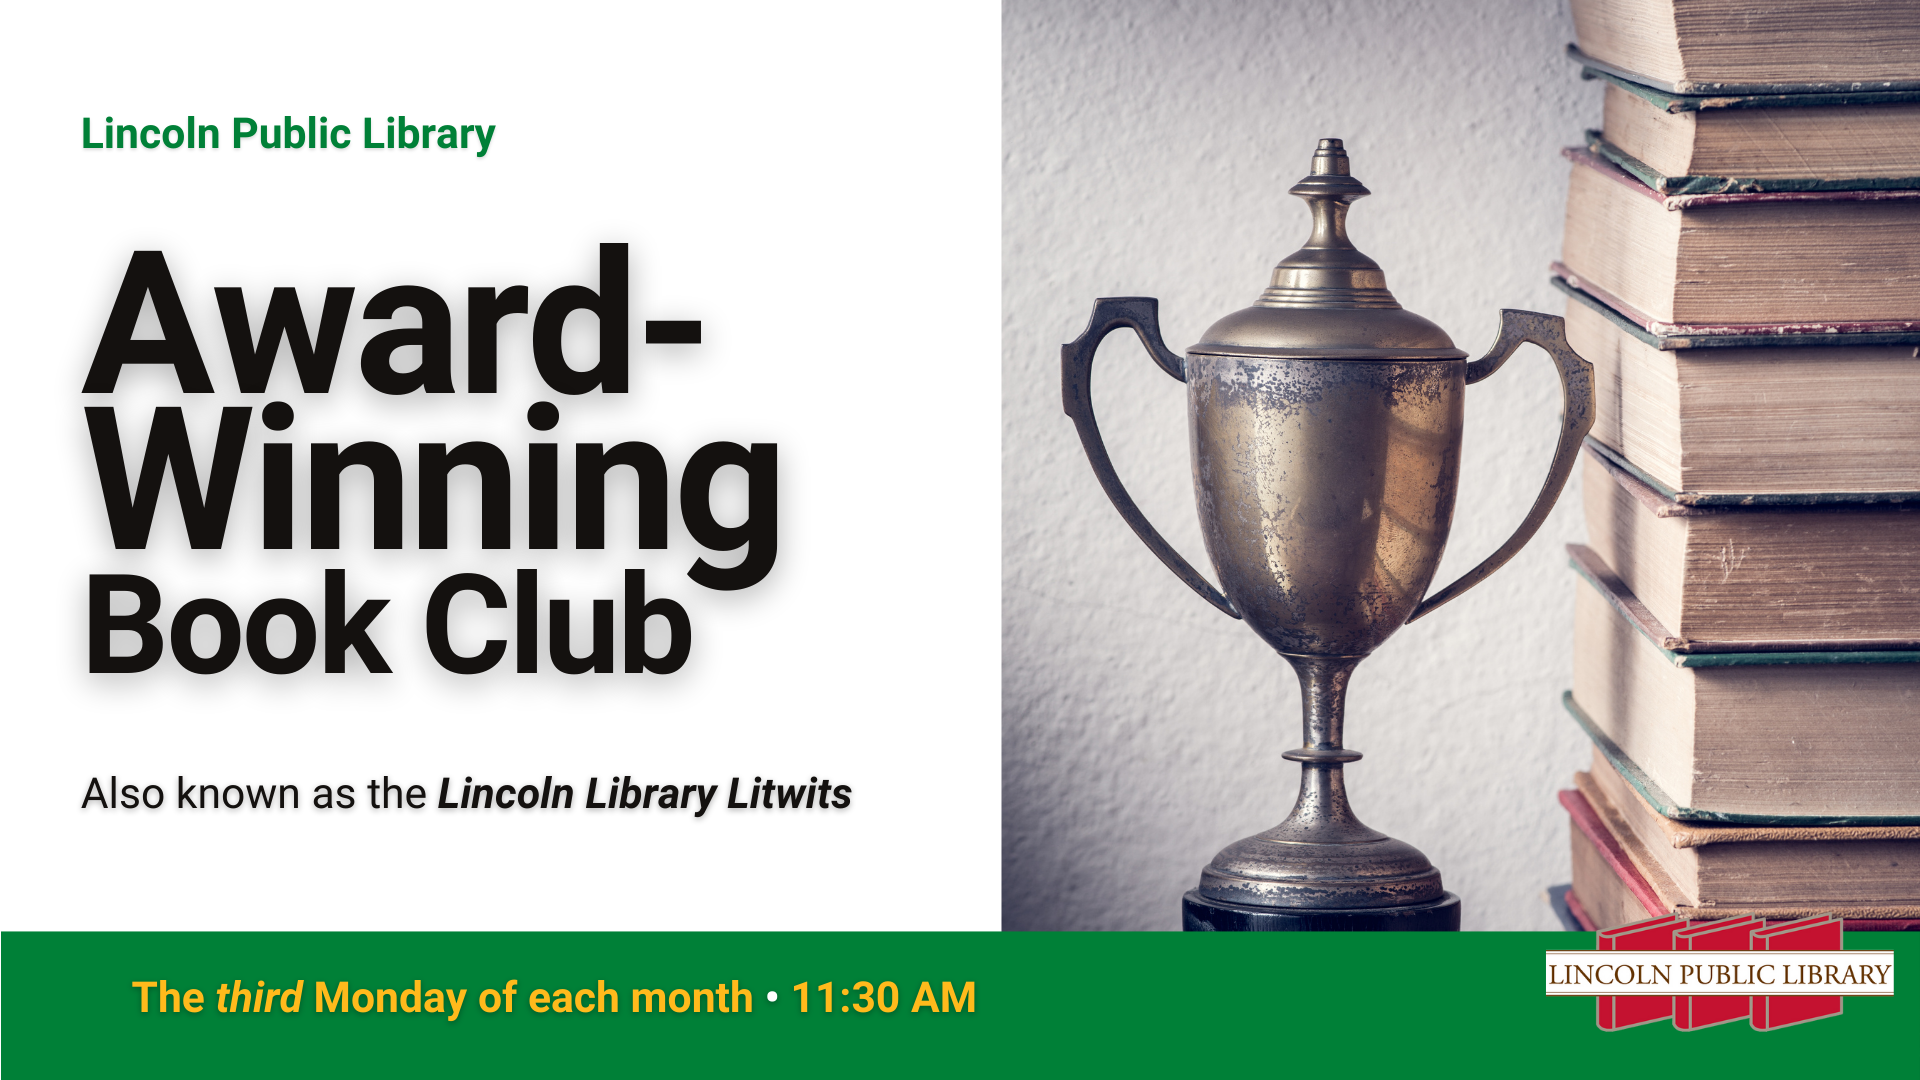 Lincoln Public Library Award-Winning Book Club: Also known as the Lincoln Library Litwits